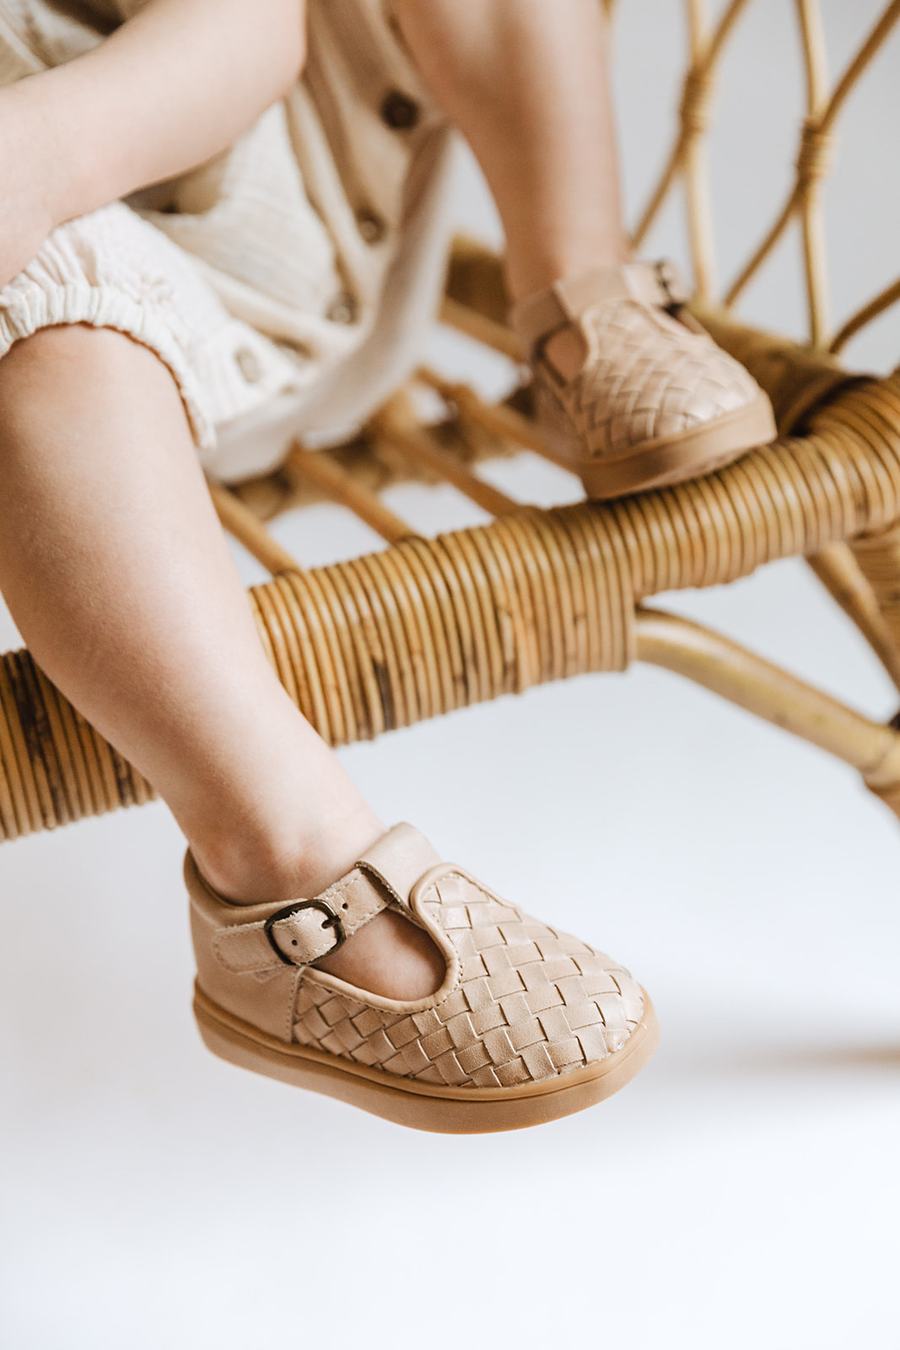 Consciously Baby Shoes Leather Woven T-Bar | Color 'Stone' | Hard Sole